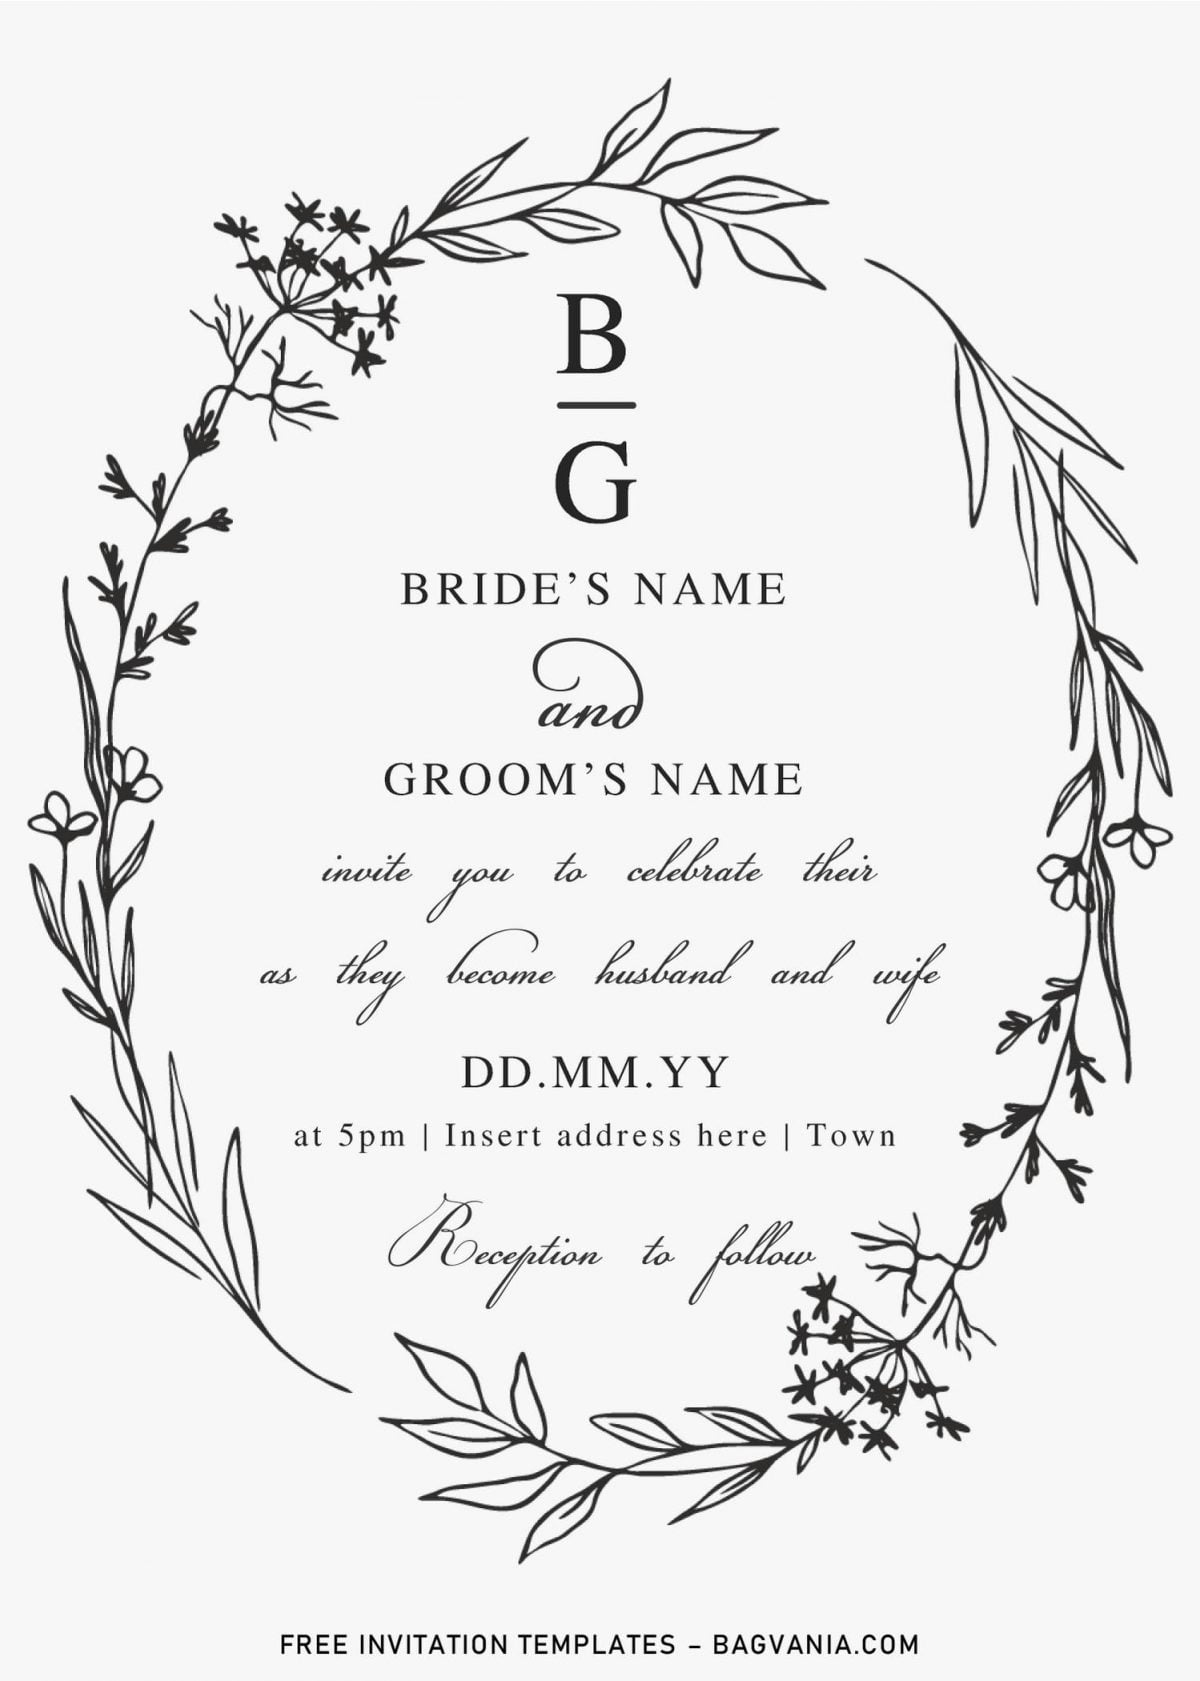 Free Floral Monogram Wedding Invitation Templates For Word and has custom floral wreath in black and white